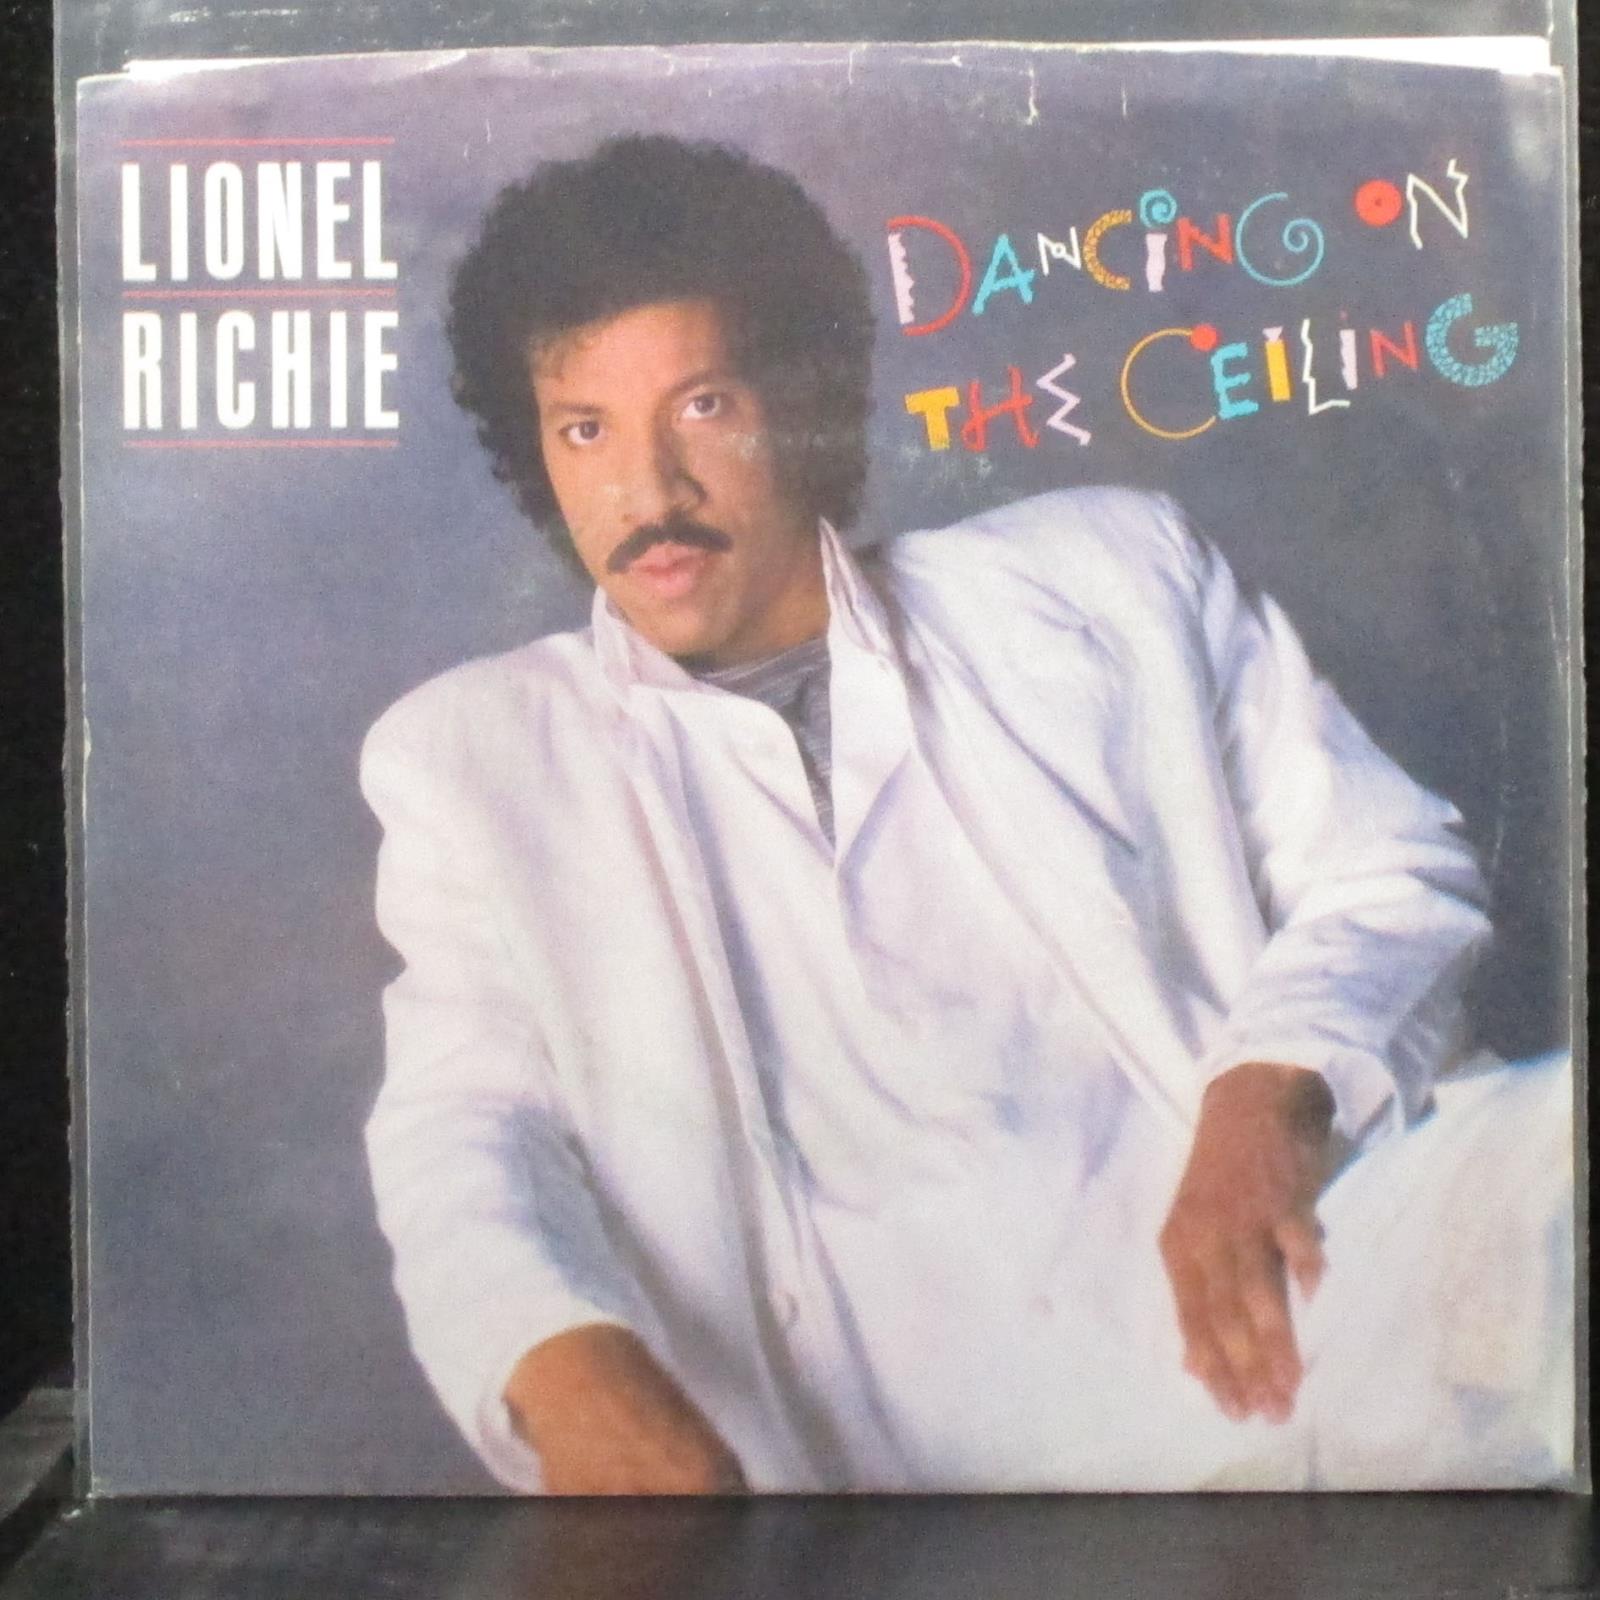 Details About Lionel Richie Dancing On The Ceiling Love Will Find A Way 7 Vg 45 Motown